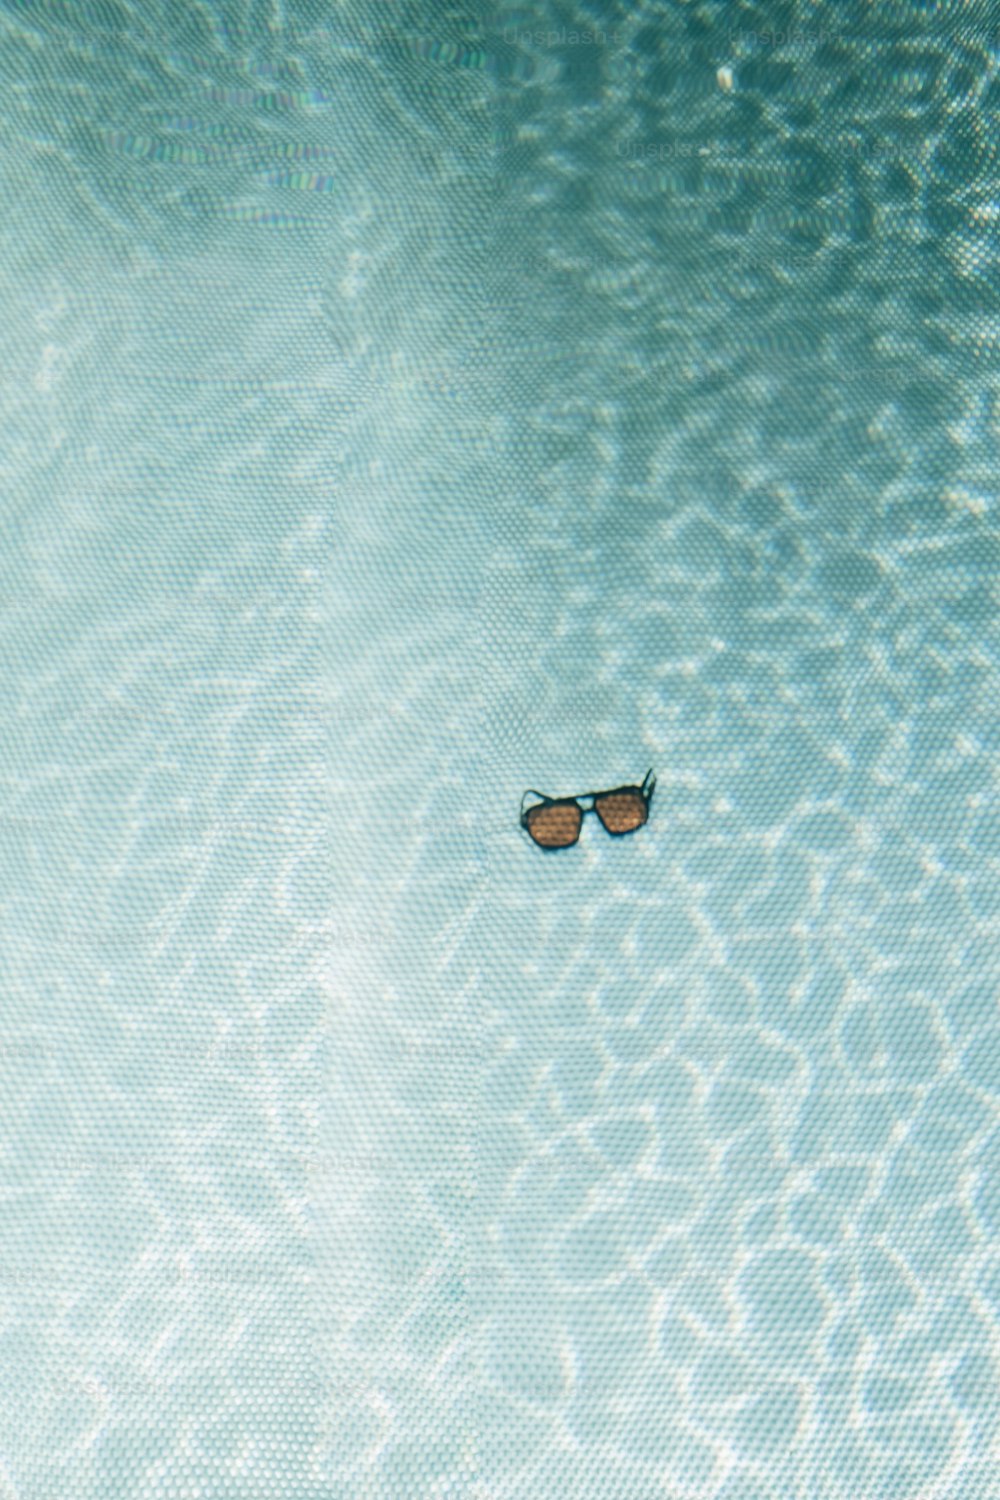 a pair of sunglasses floating in a pool of water